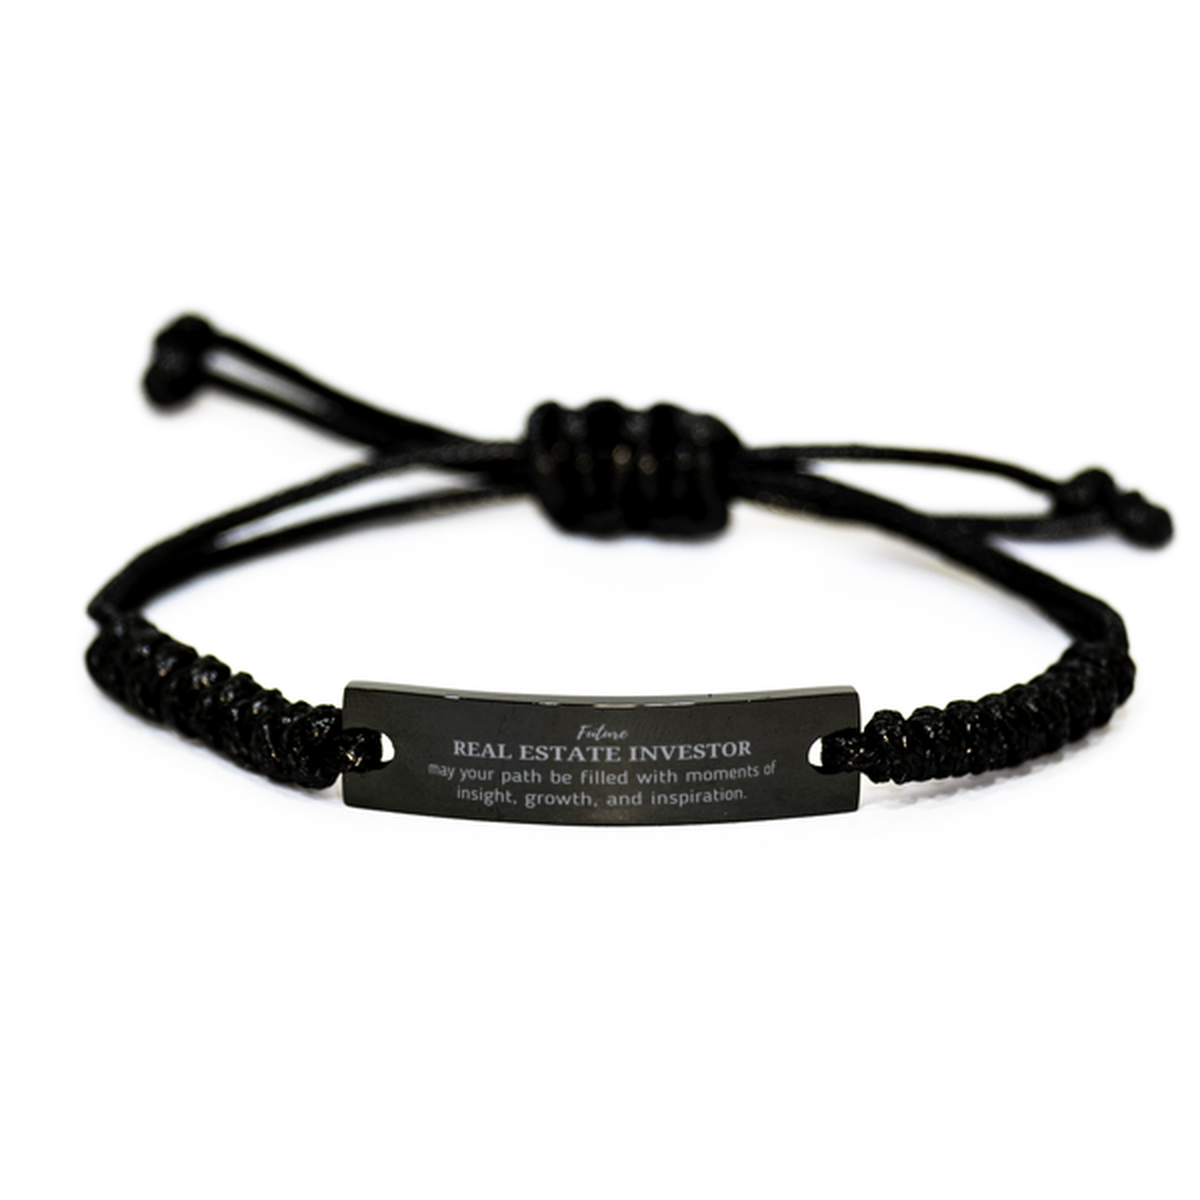 Future Real Estate Investor Gifts, May your path be filled with moments of insight, Graduation Gifts for New Real Estate Investor, Christmas Unique Black Rope Bracelet For Men, Women, Friends